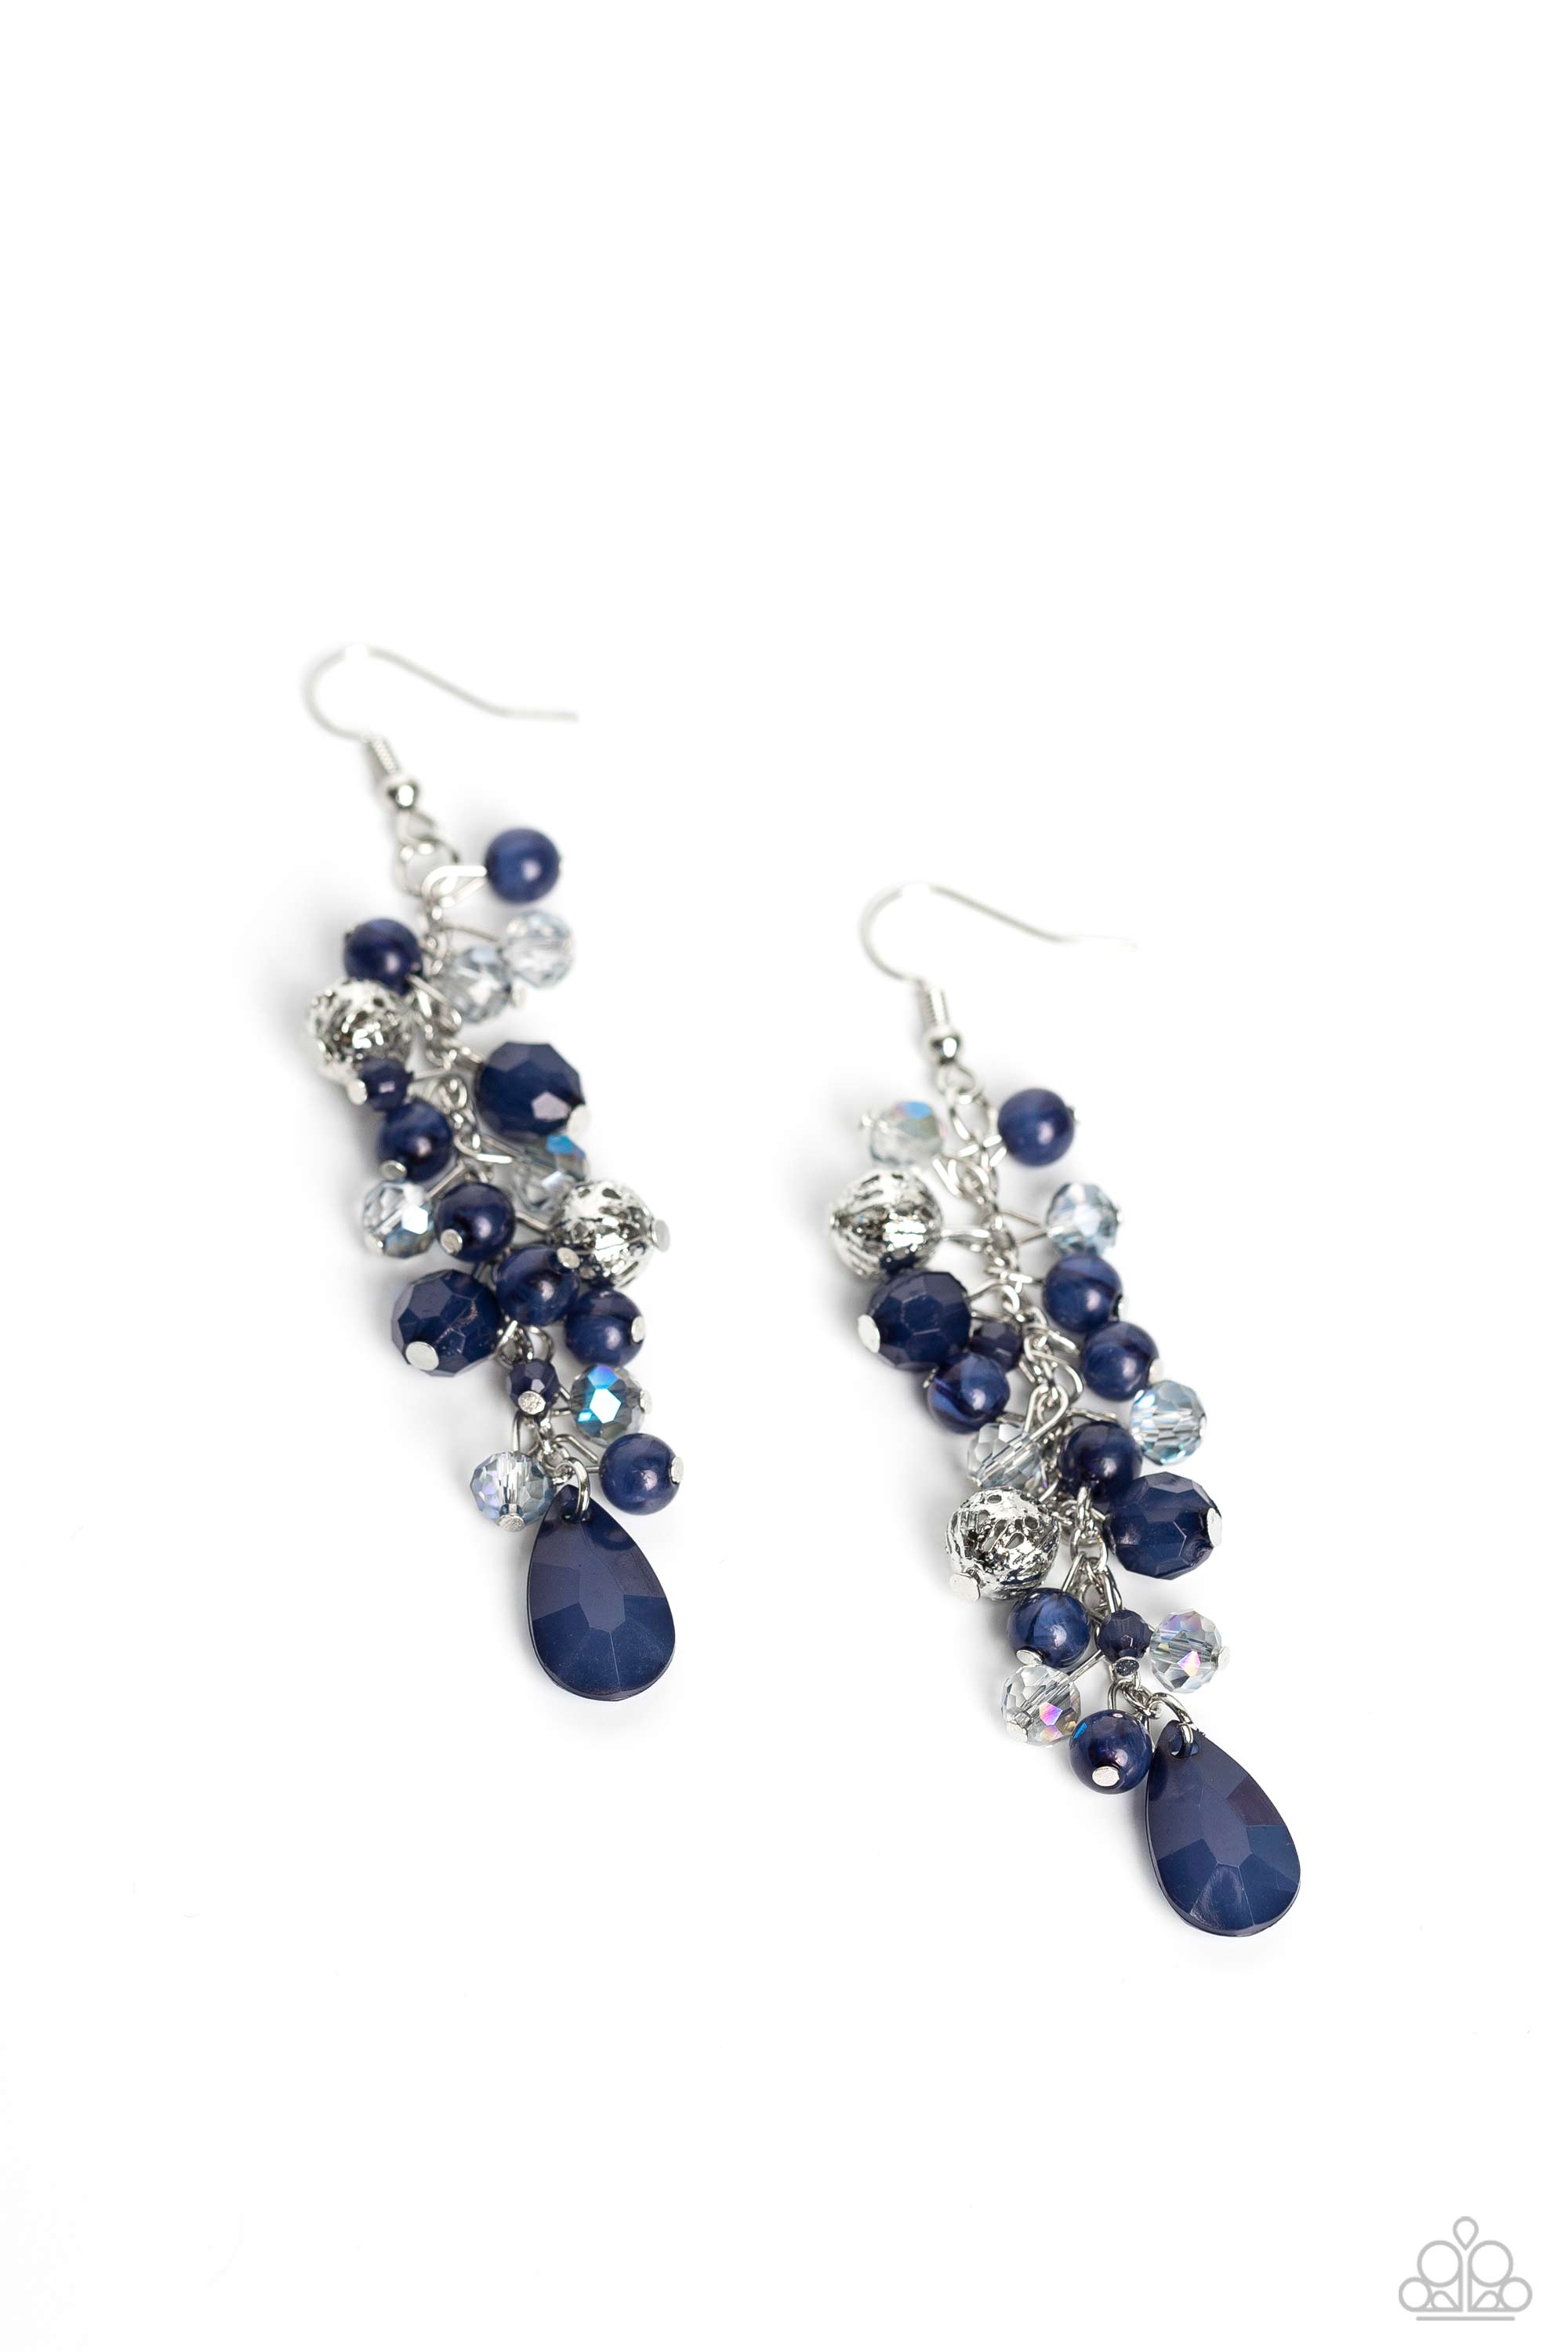 Cheeky Cascade Blue Earrings - Paparazzi Accessories- lightbox - CarasShop.com - $5 Jewelry by Cara Jewels